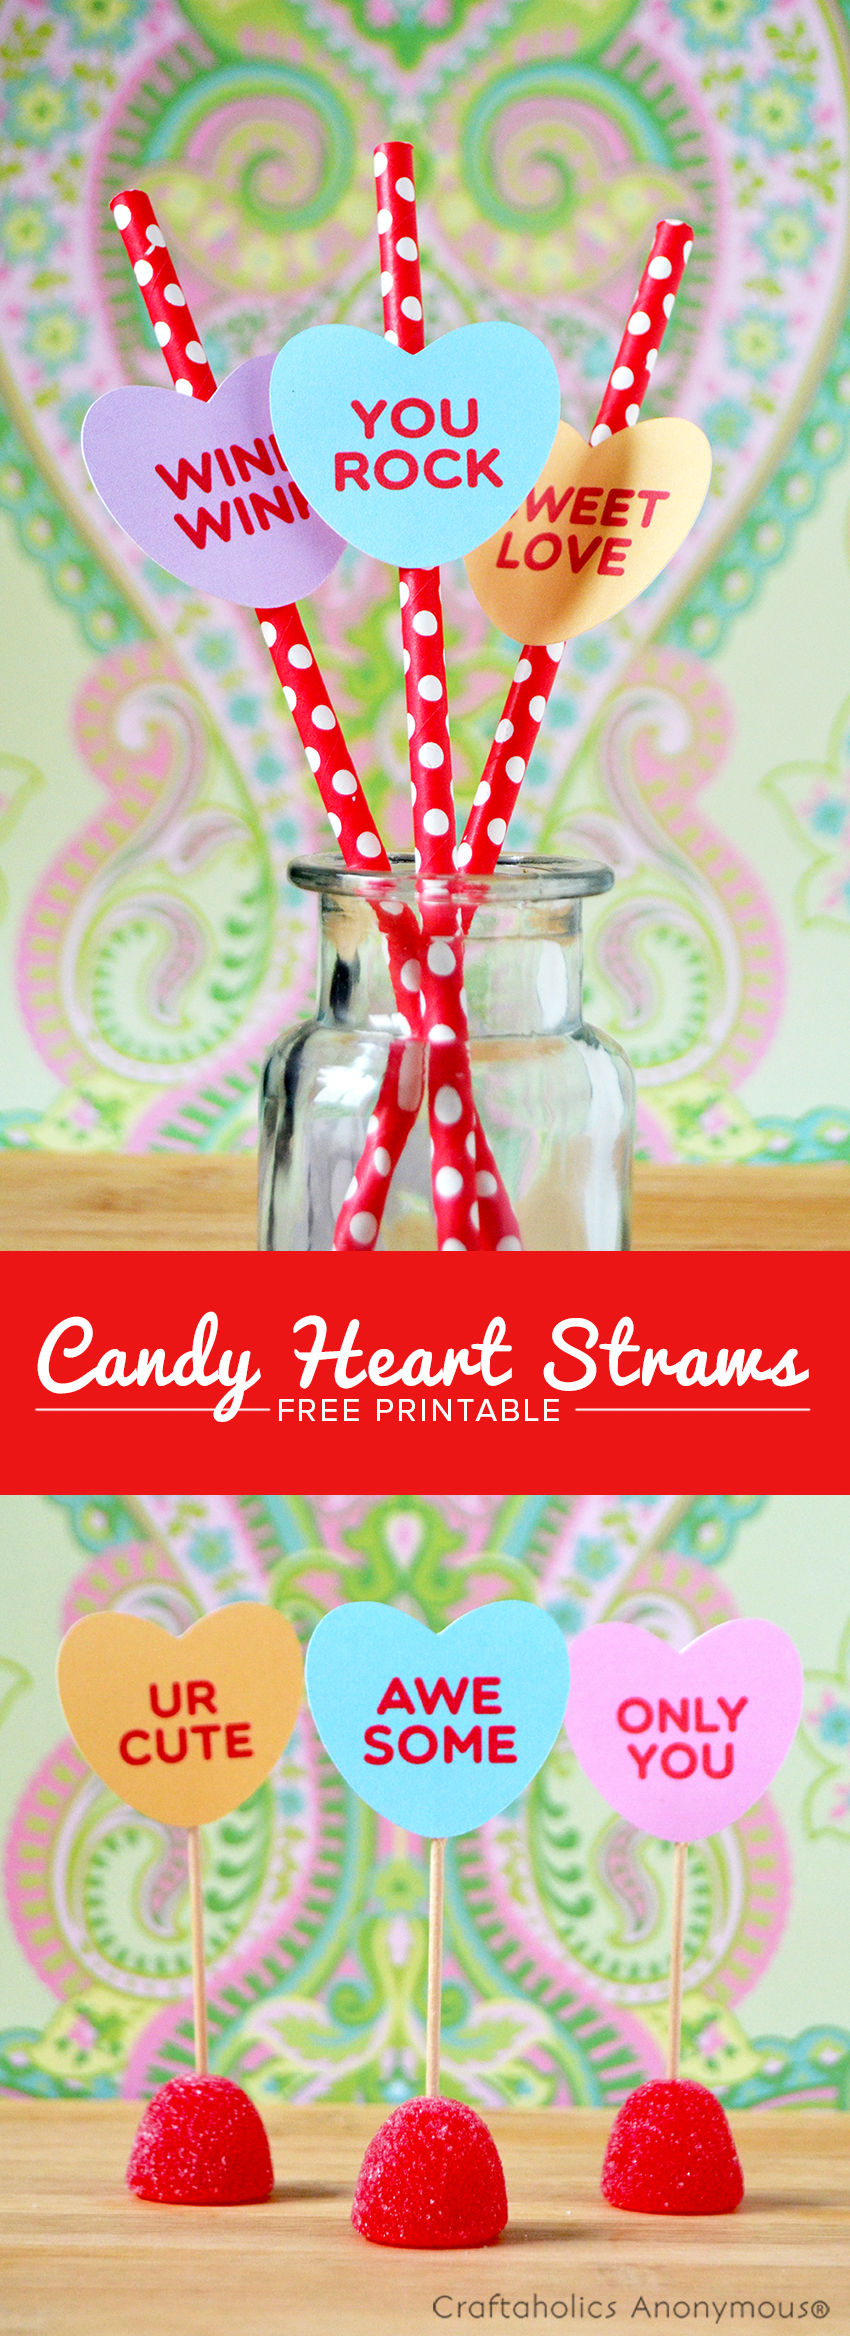 Free Candy Hearts Printable || So many ways you can use this free valentine's Day Printable!